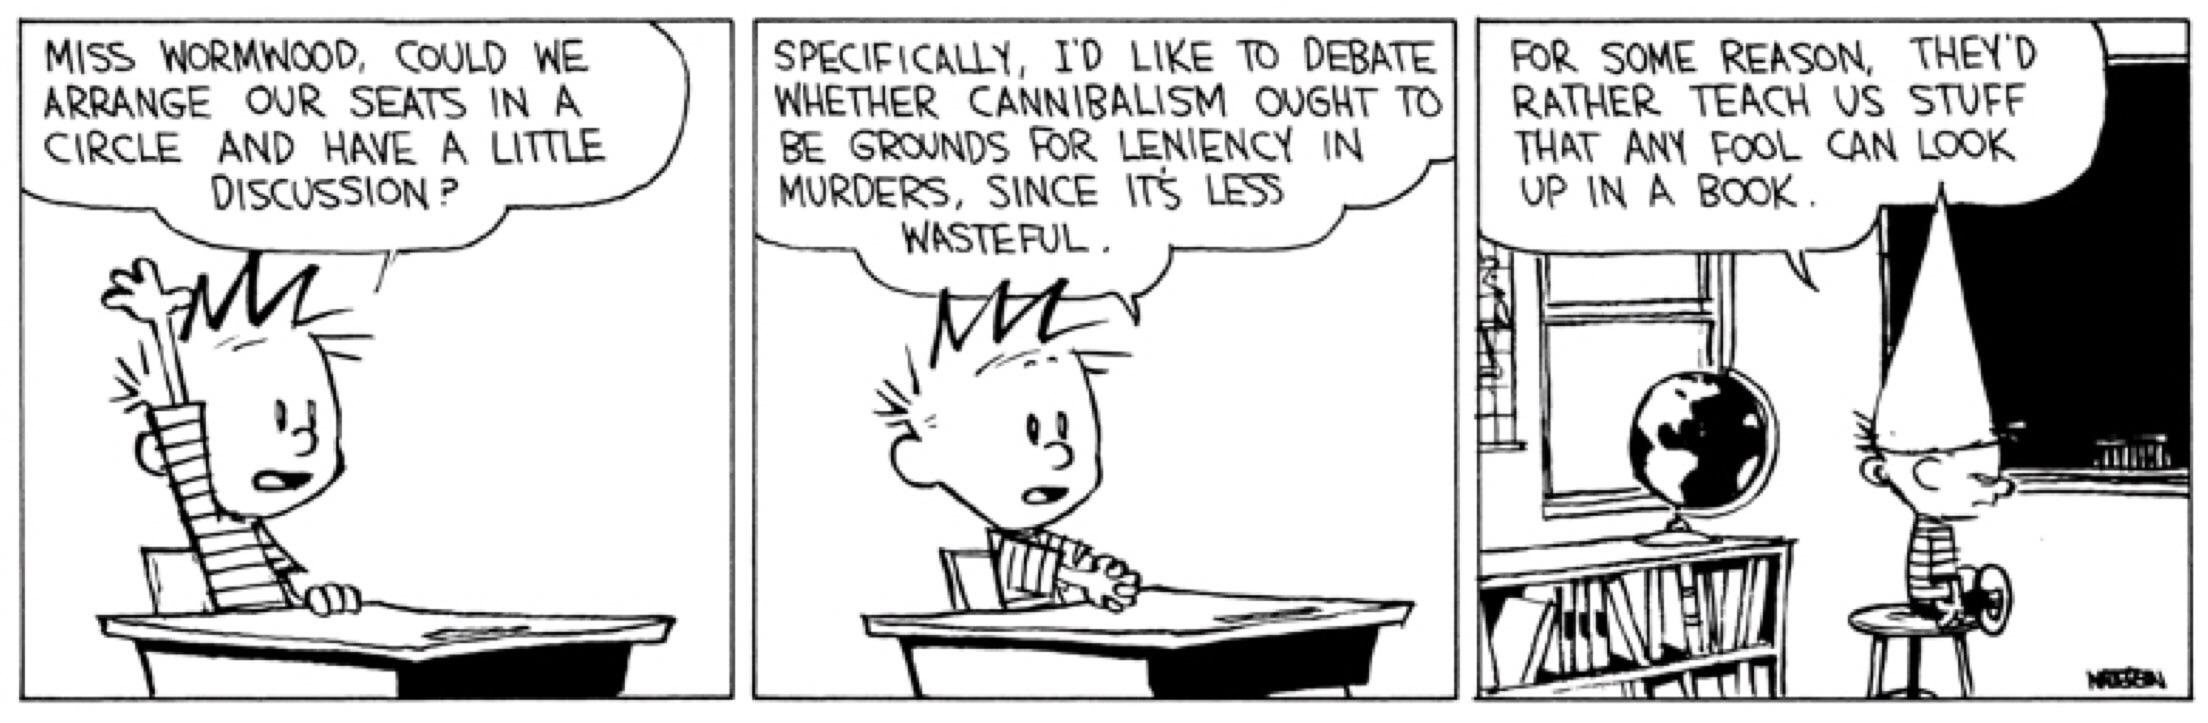 Calvin and Hobbes Comic Strip: Can we have a discussion